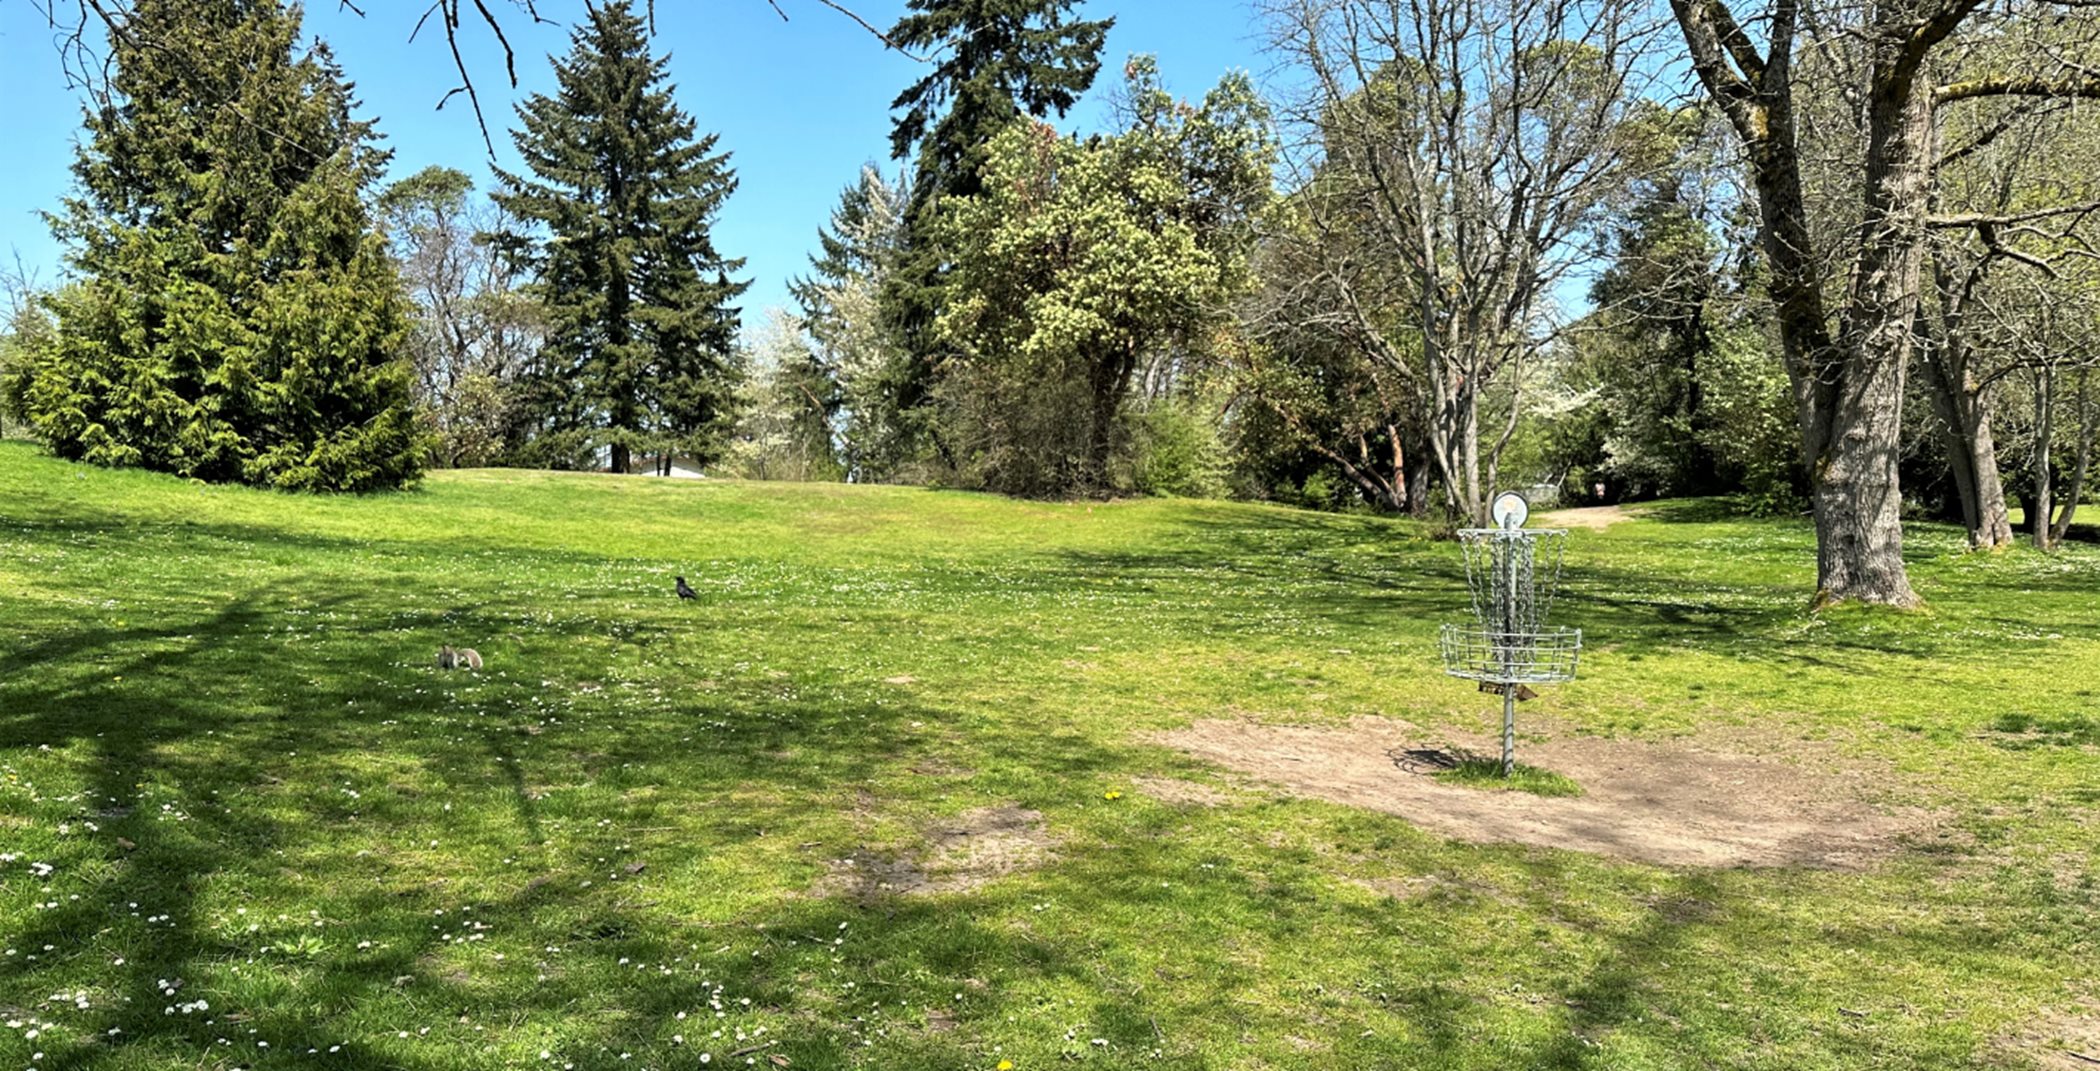 Lakewood King County Disc Golf Club grass and trees